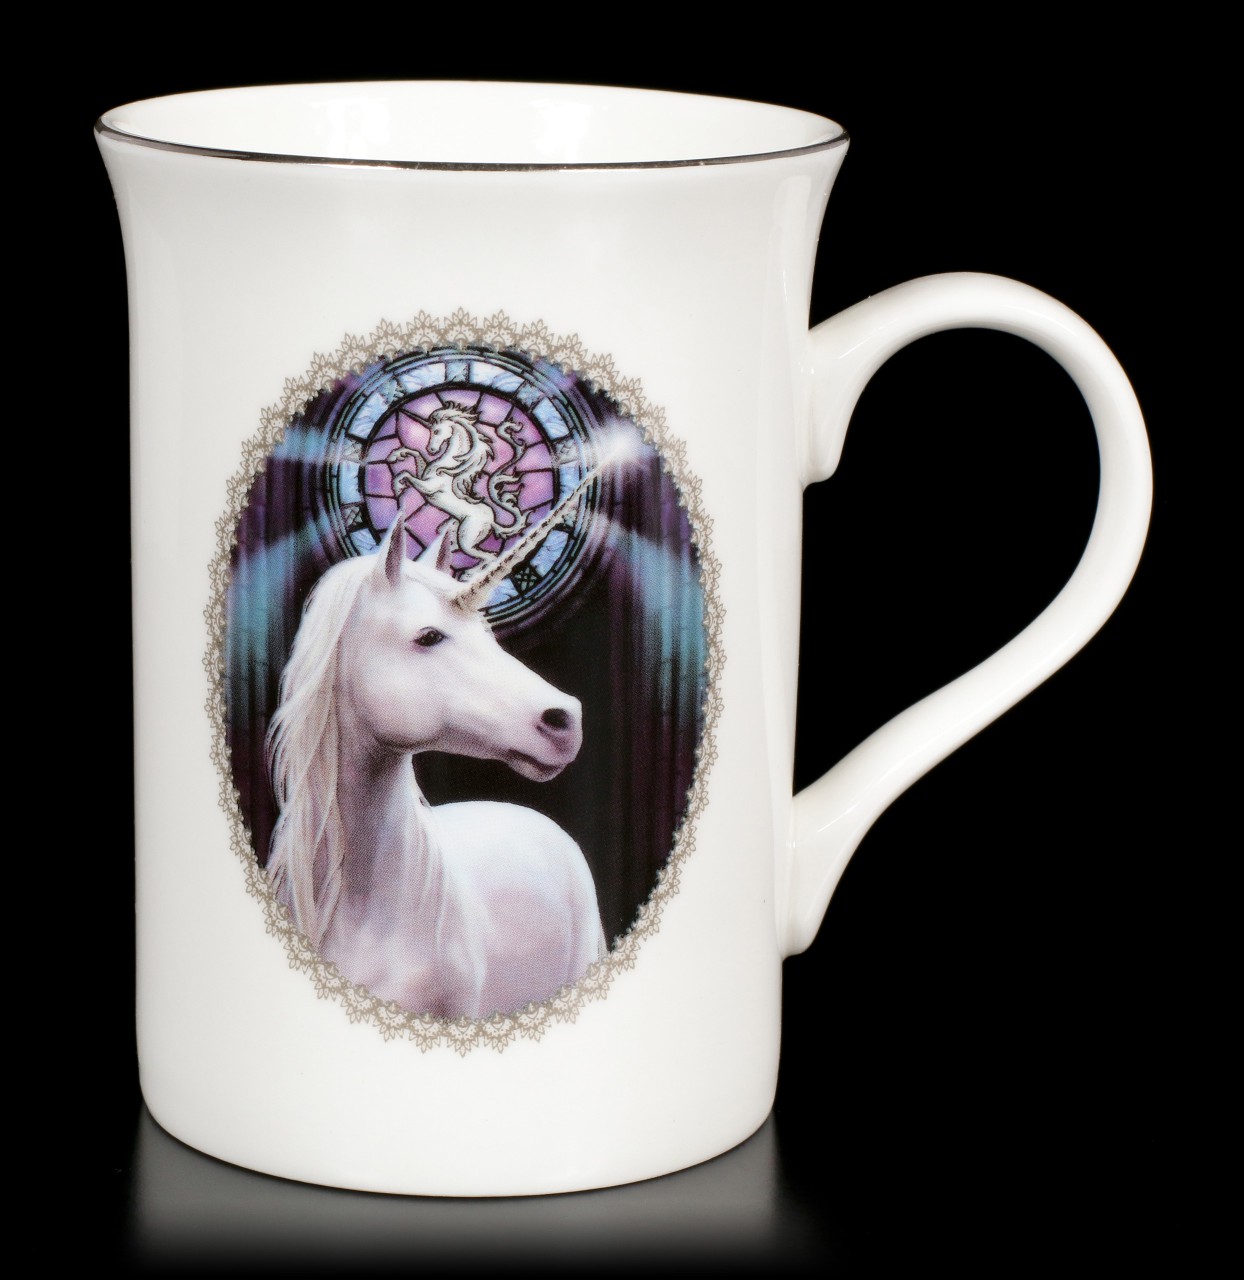 Mug with Unicorn - Enlightenment by Anne Stokes